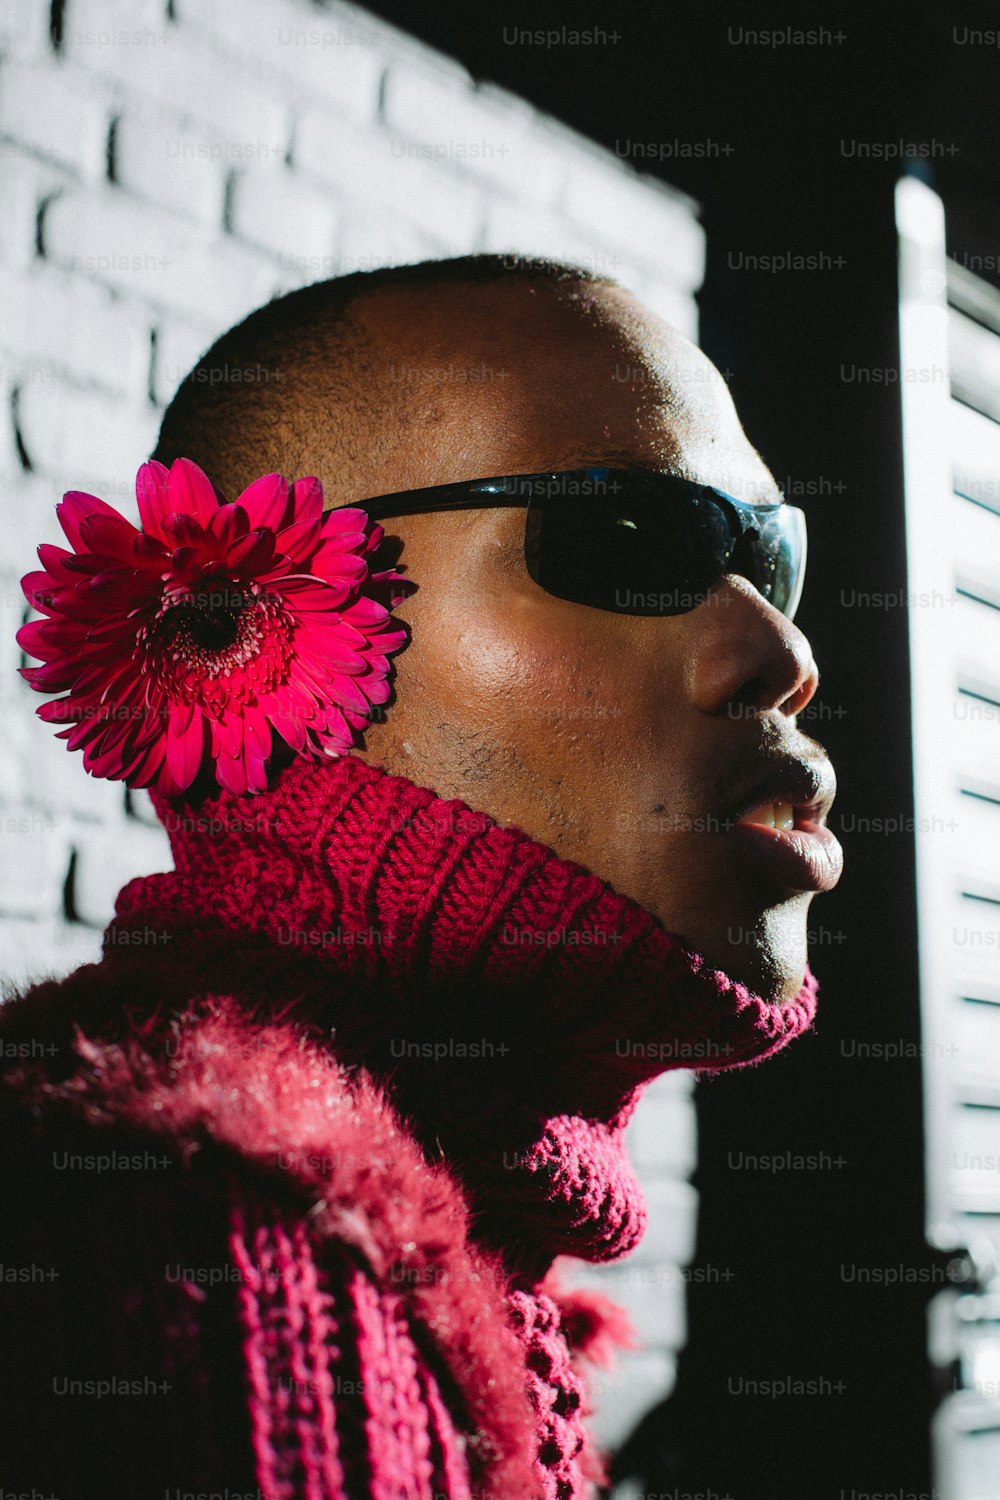 a person wearing sunglasses and a red flower in the hair